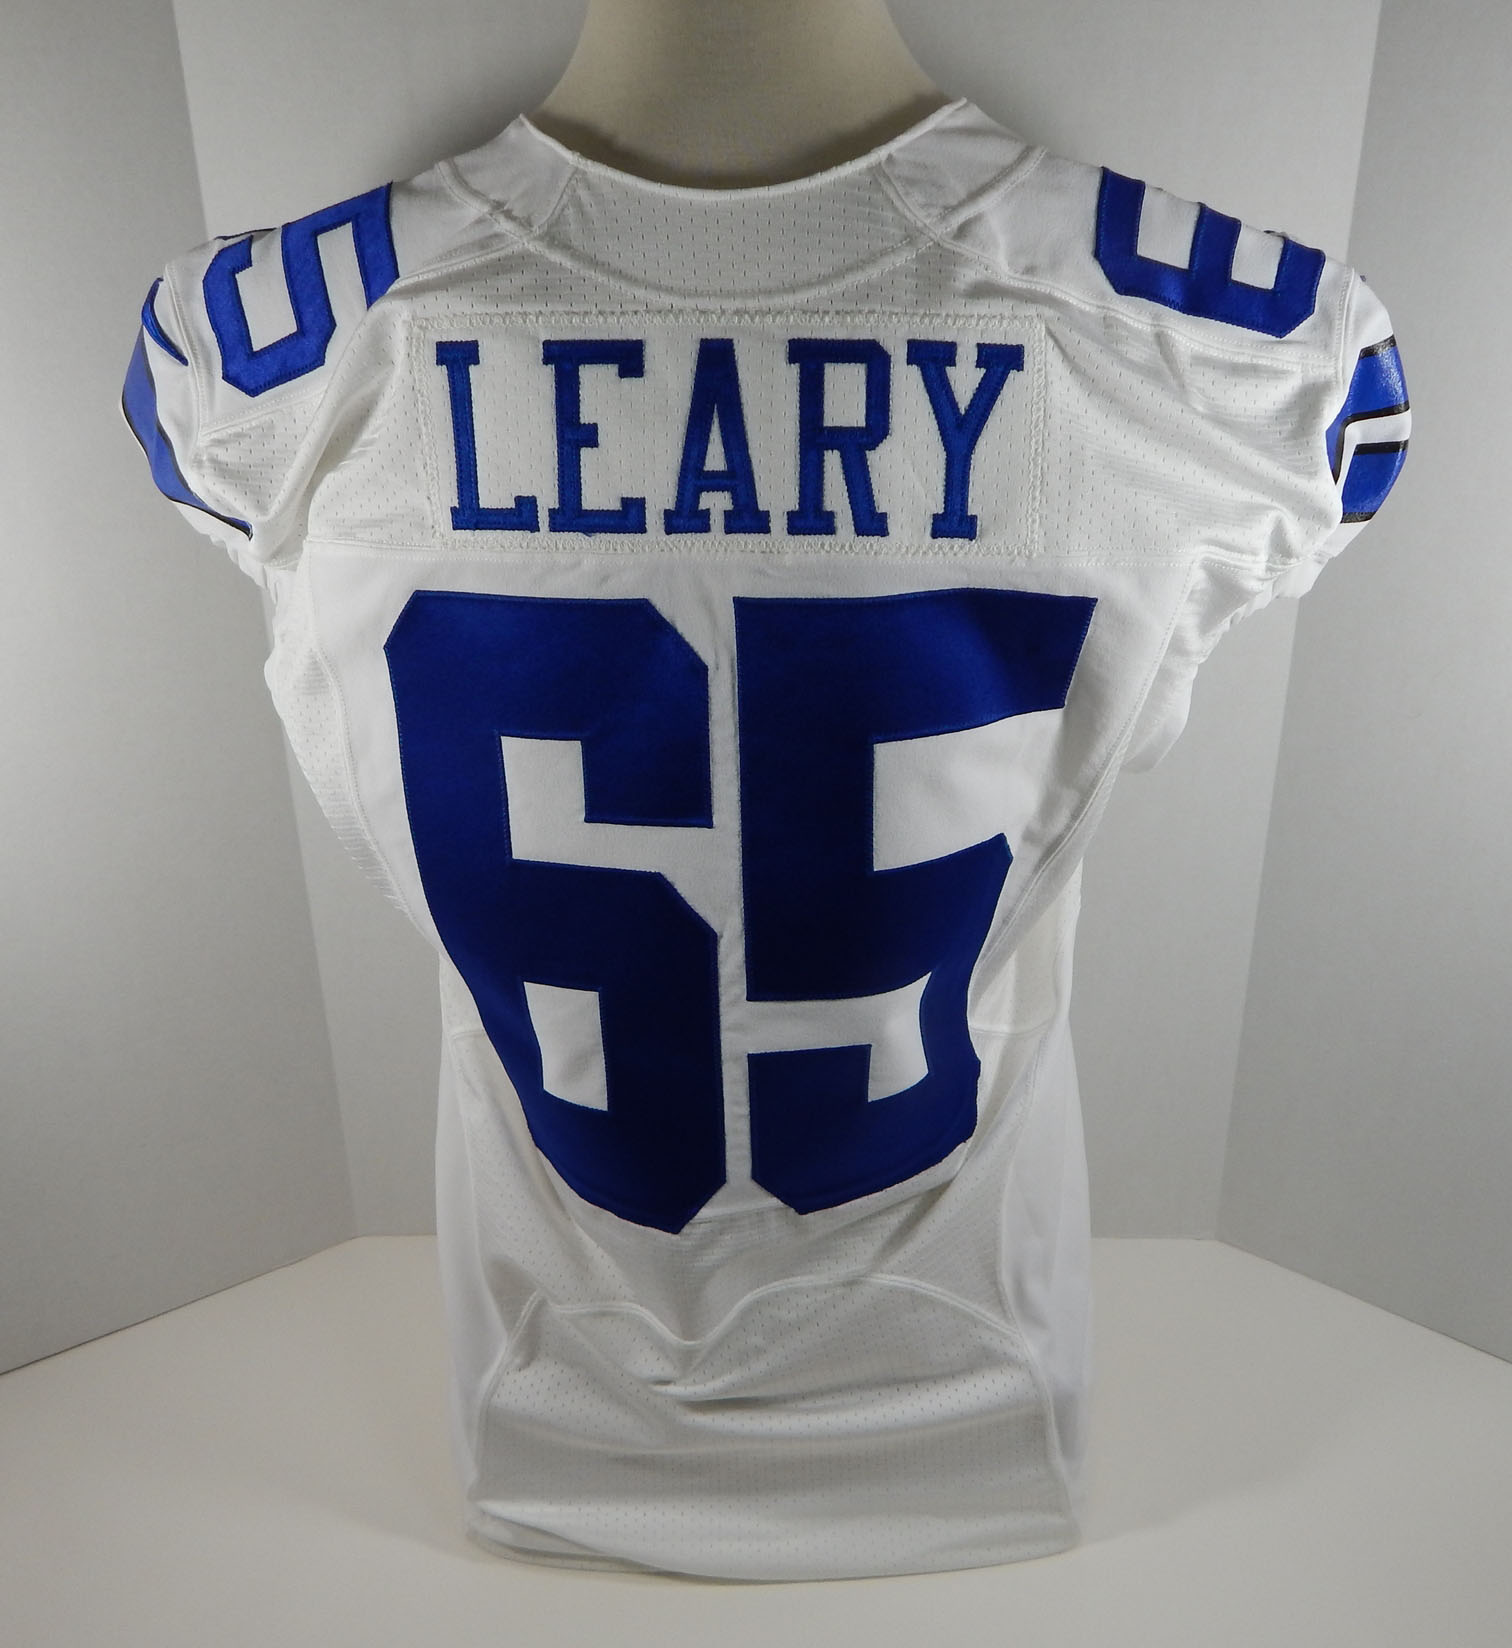 ronald leary jersey